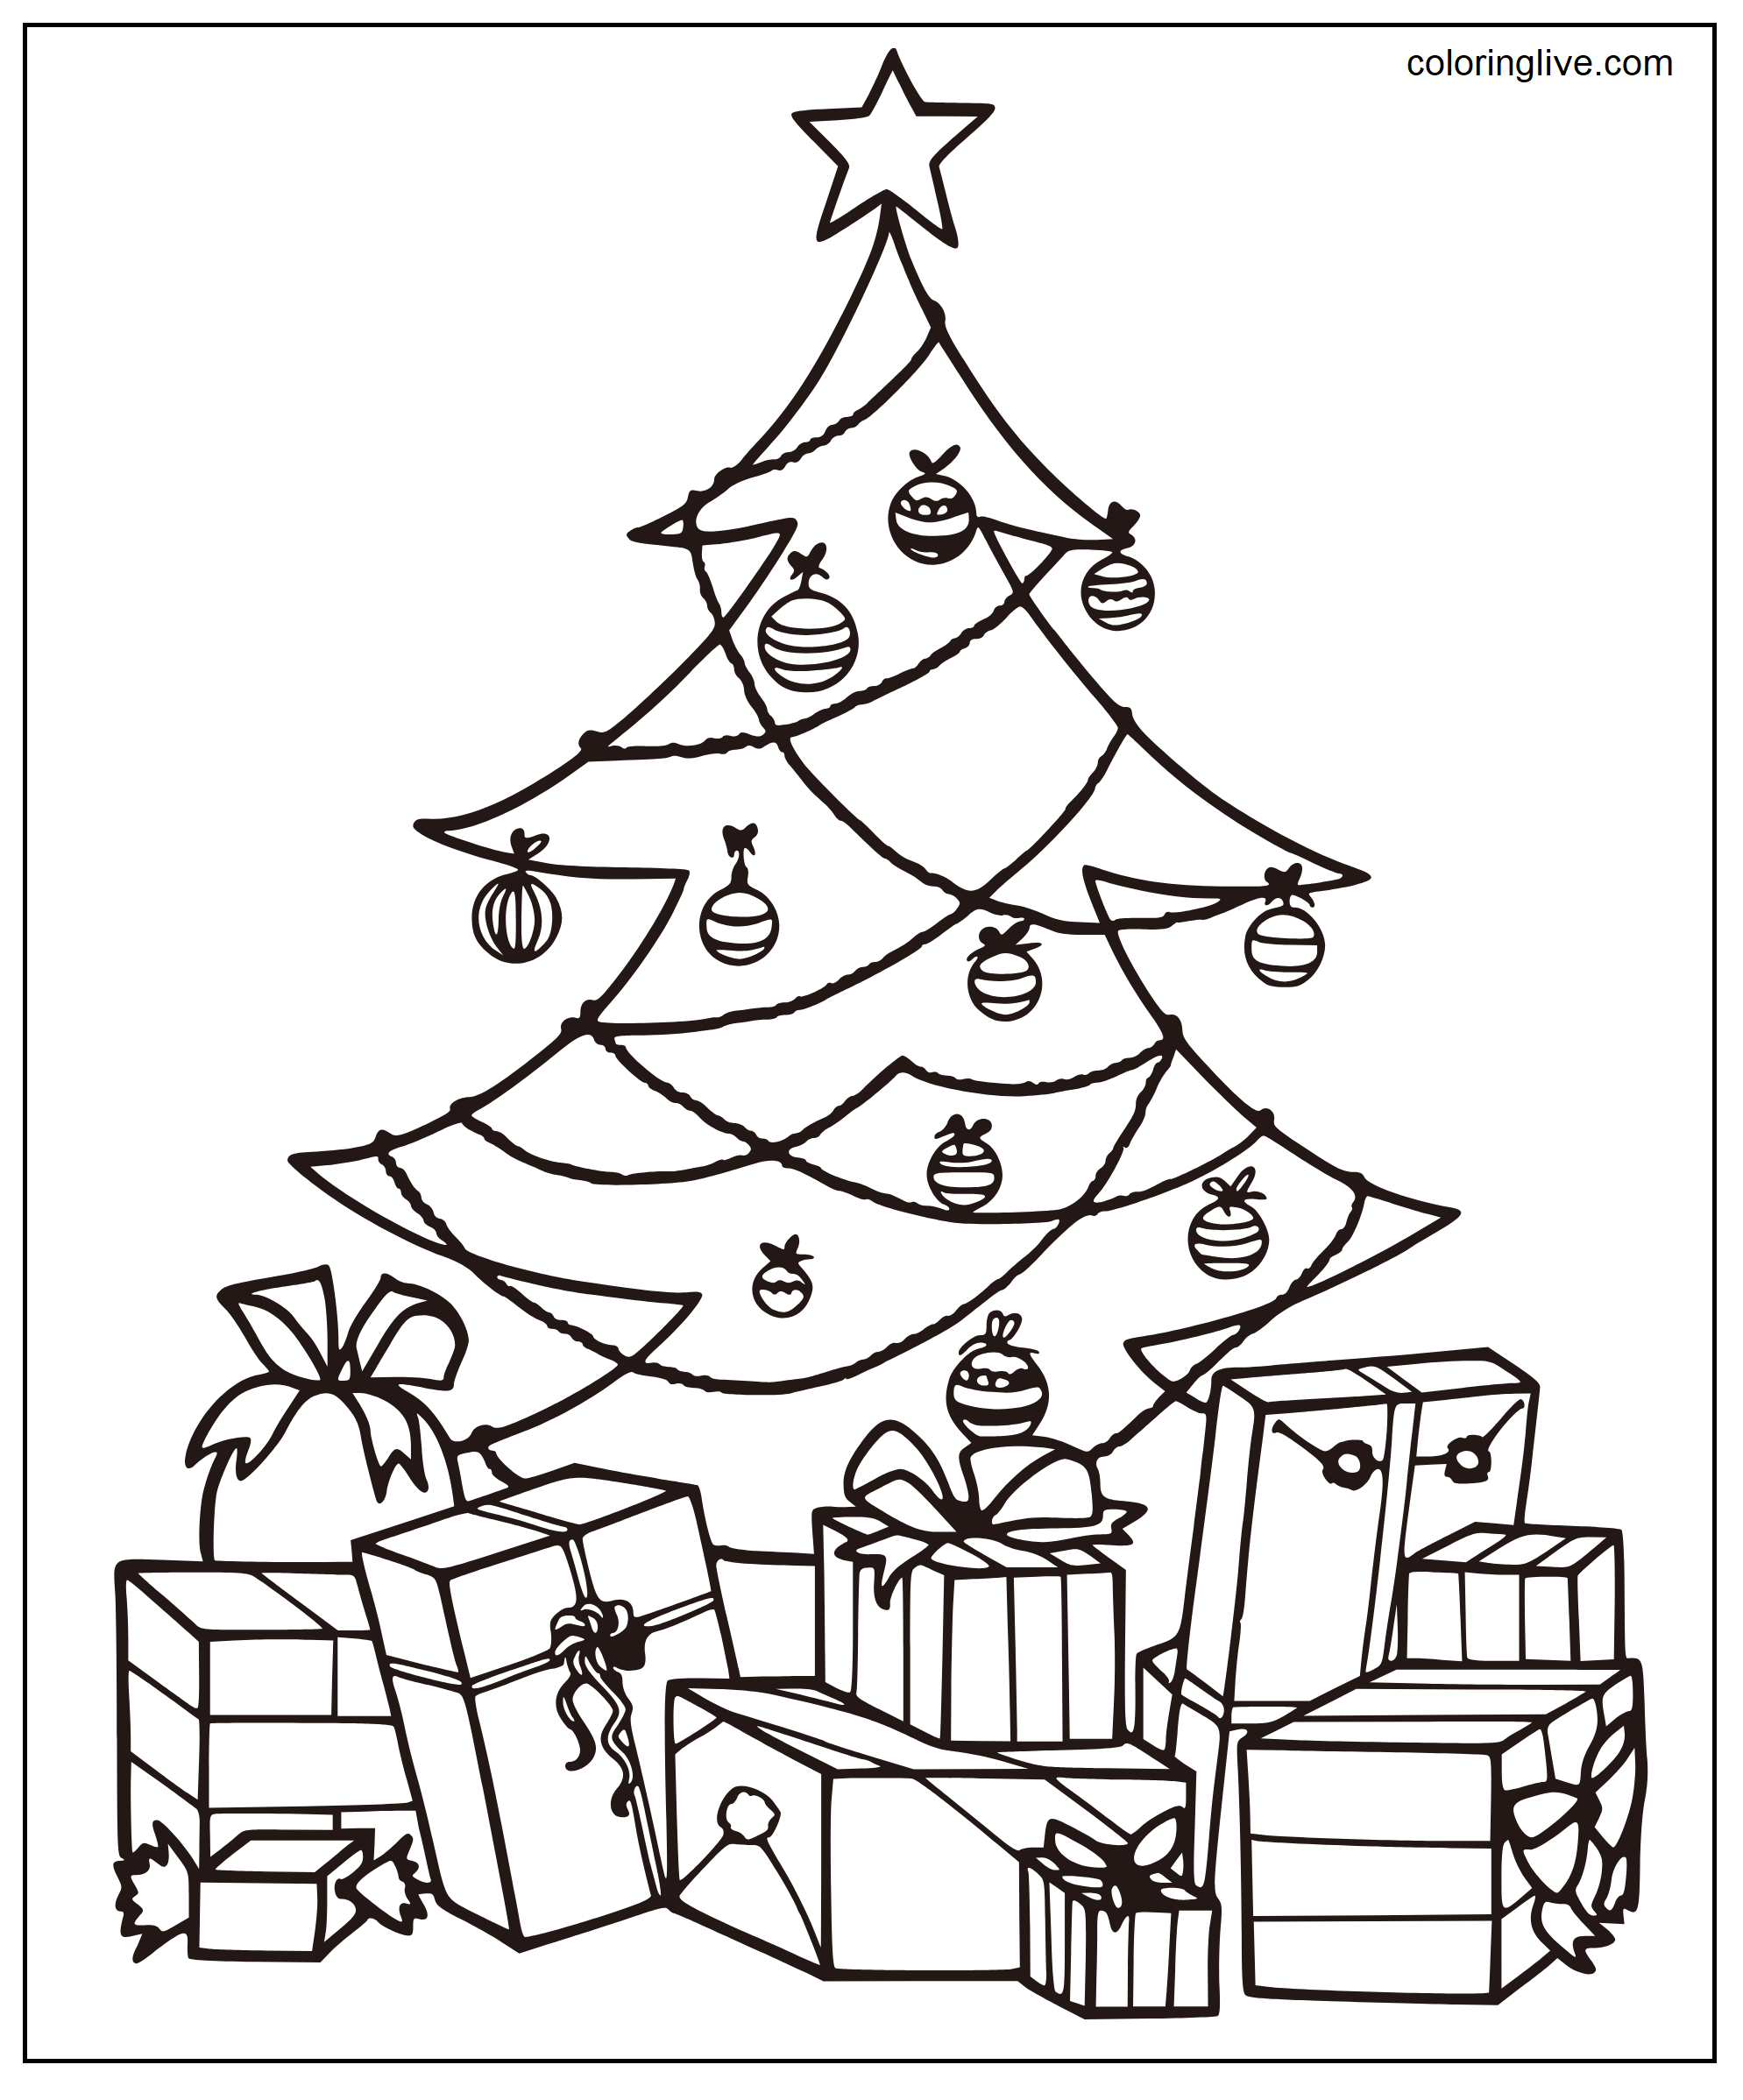 Printable Gifts and Christmas tree  sheets Coloring Page for kids.